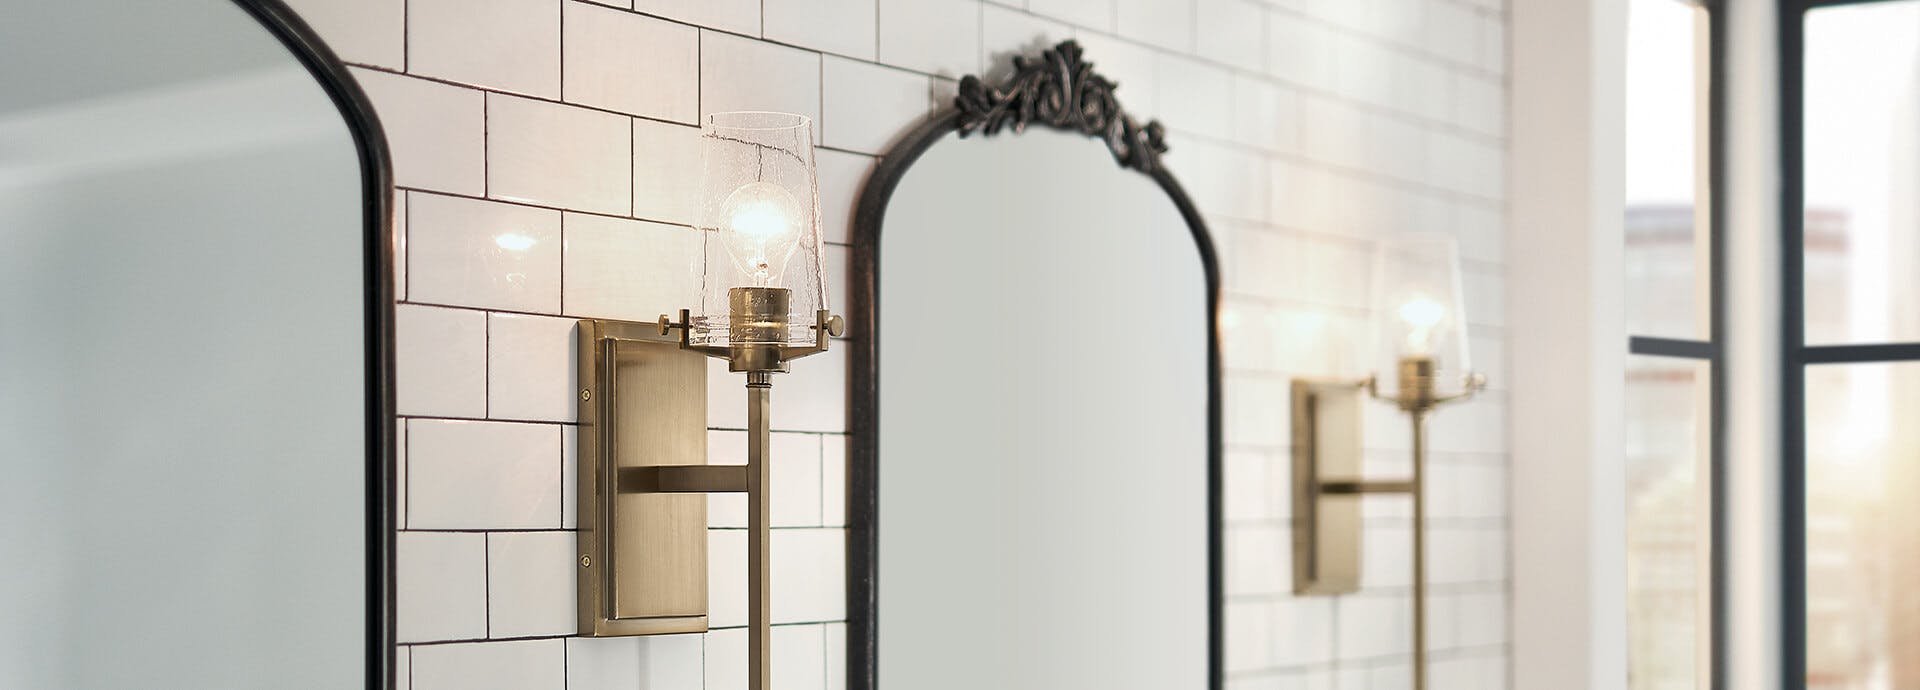 Two brass alton sconces on either side of two mirrors in a white tiled bathroom during the day